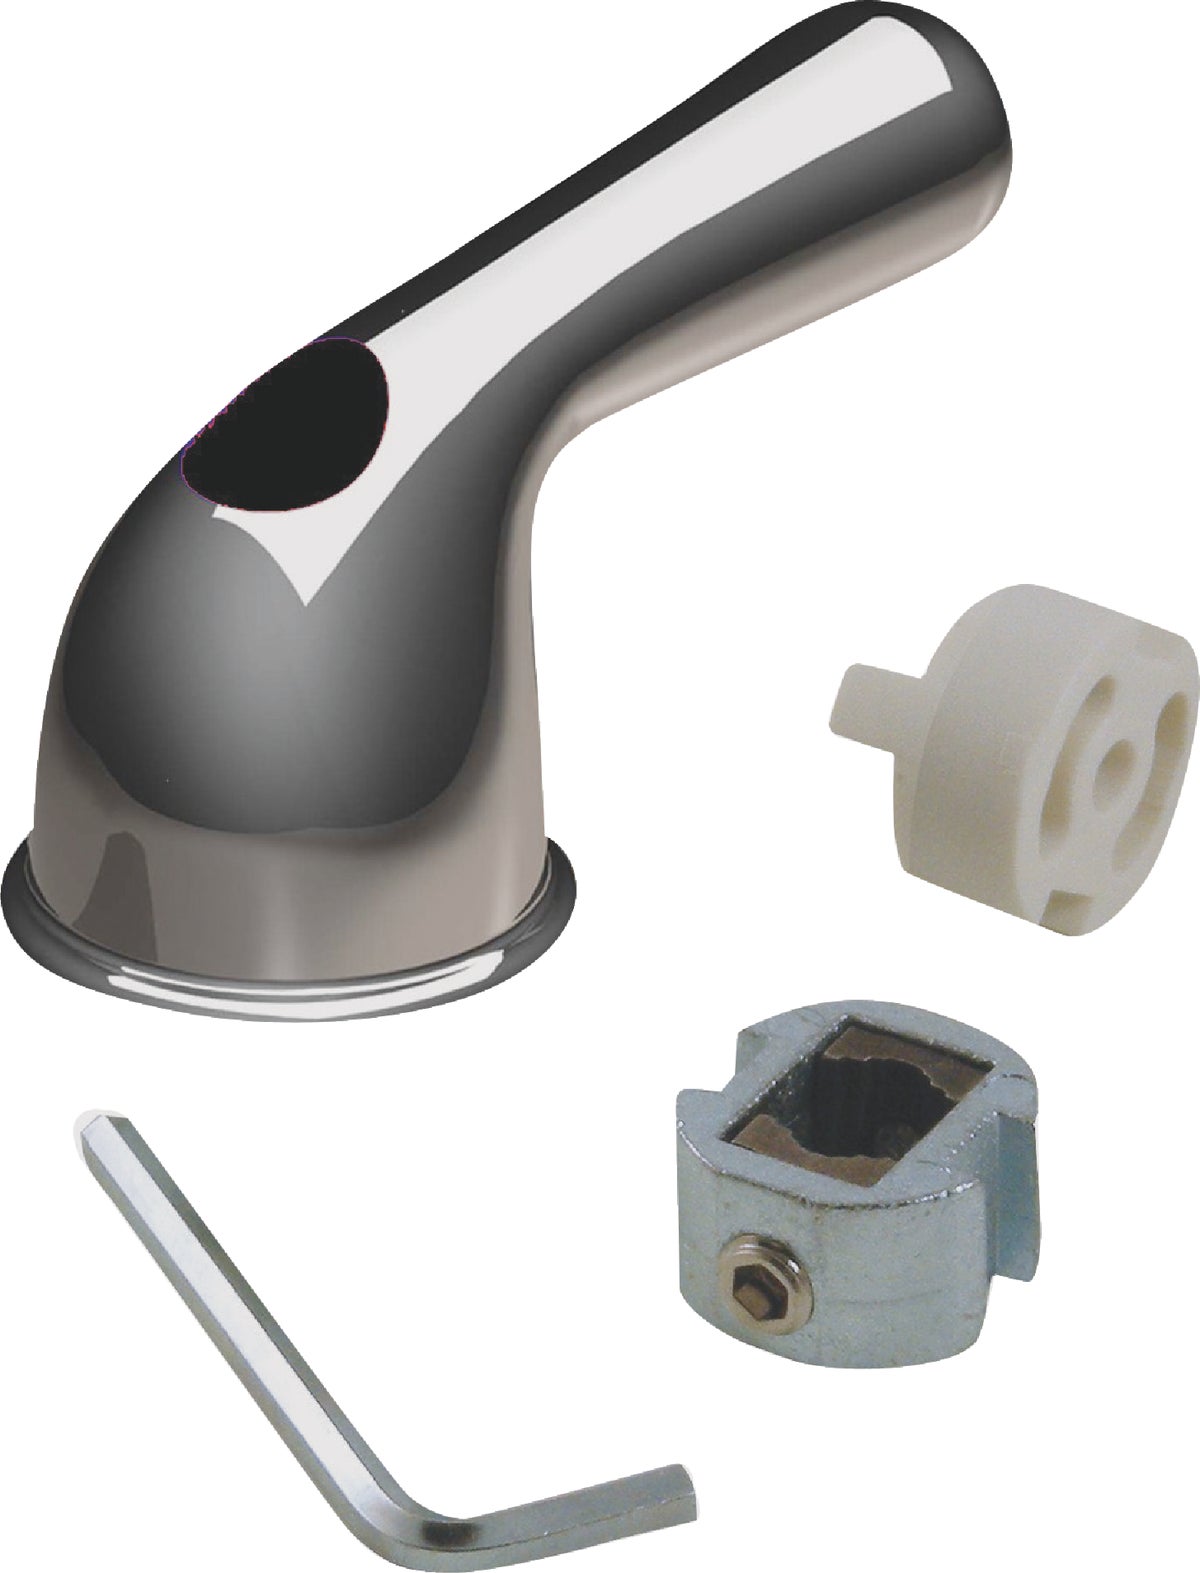 Danco 80908 Replacement Faucet Handle With Universal Adapter for sale online 